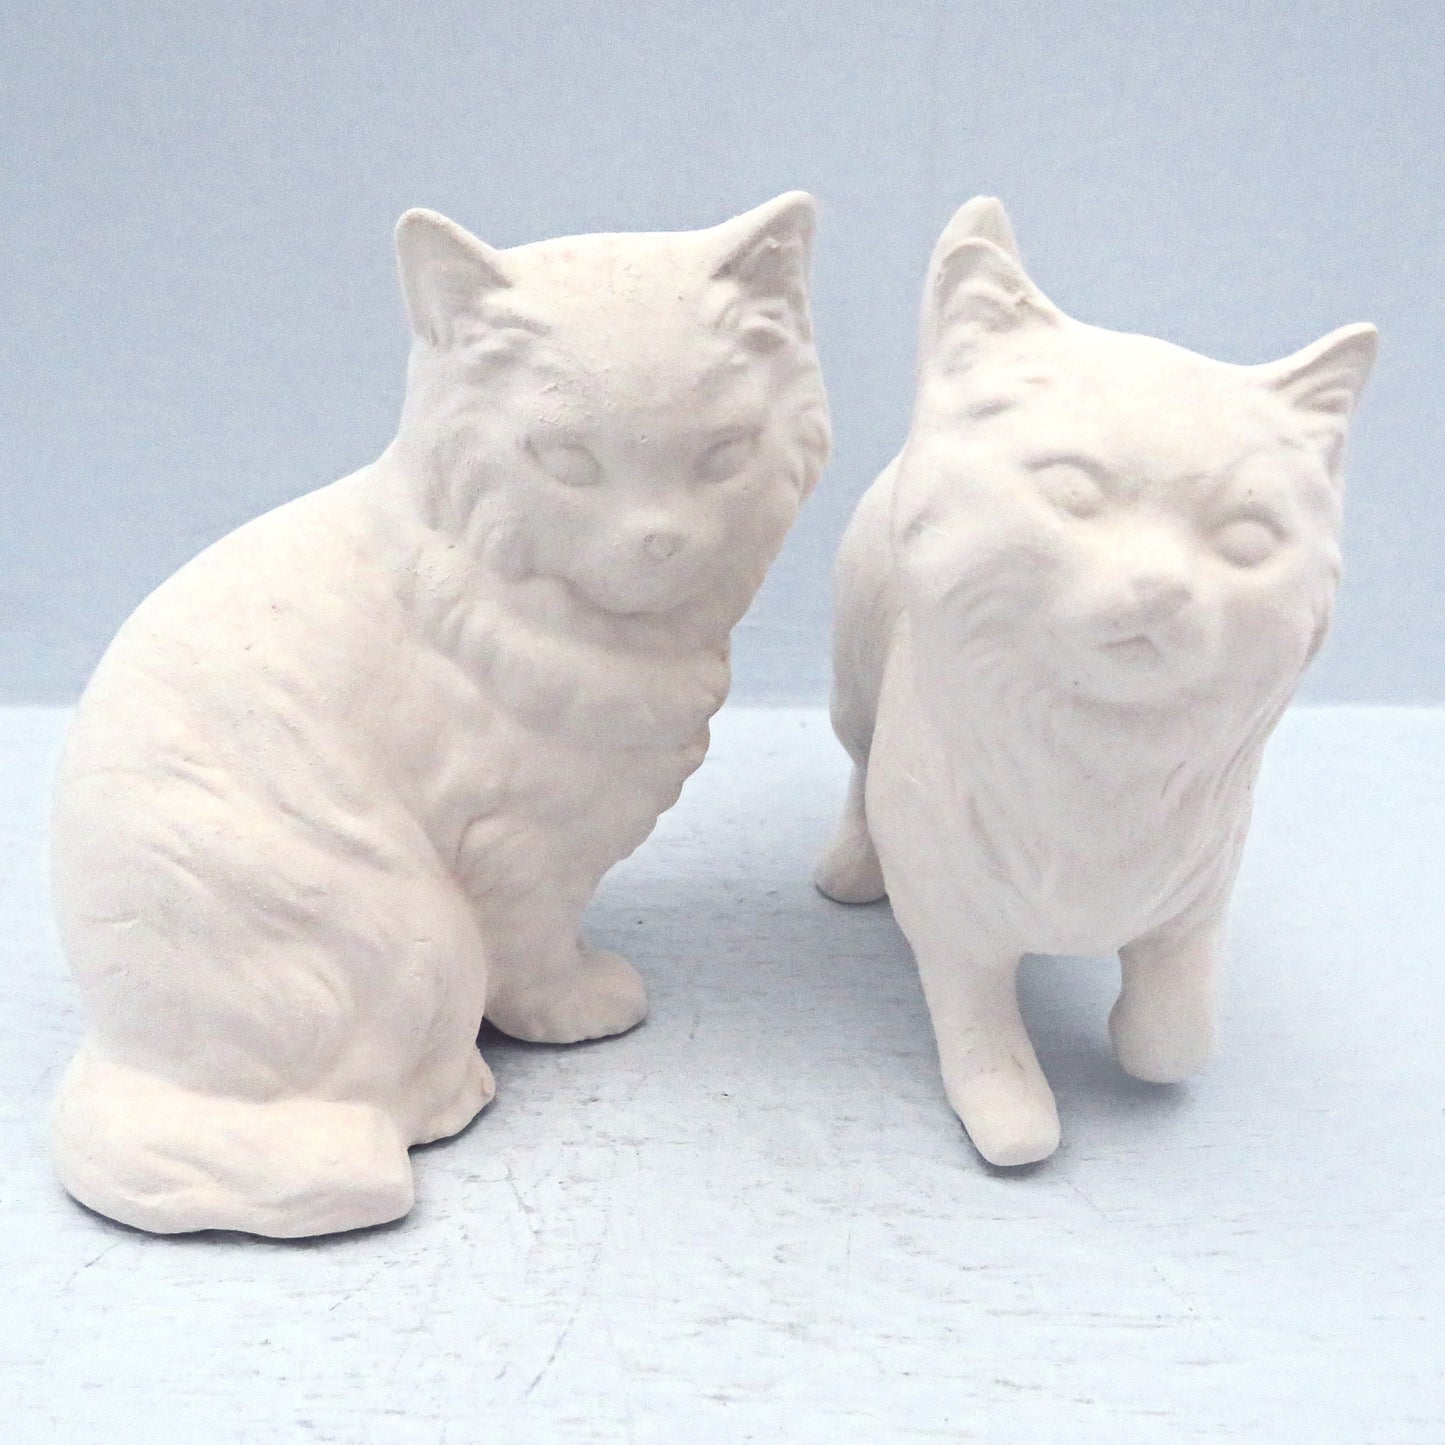 Set of 2 Unpainted ceramic cat figurines.  One is sitting, the other standing on a pale blue surface.  